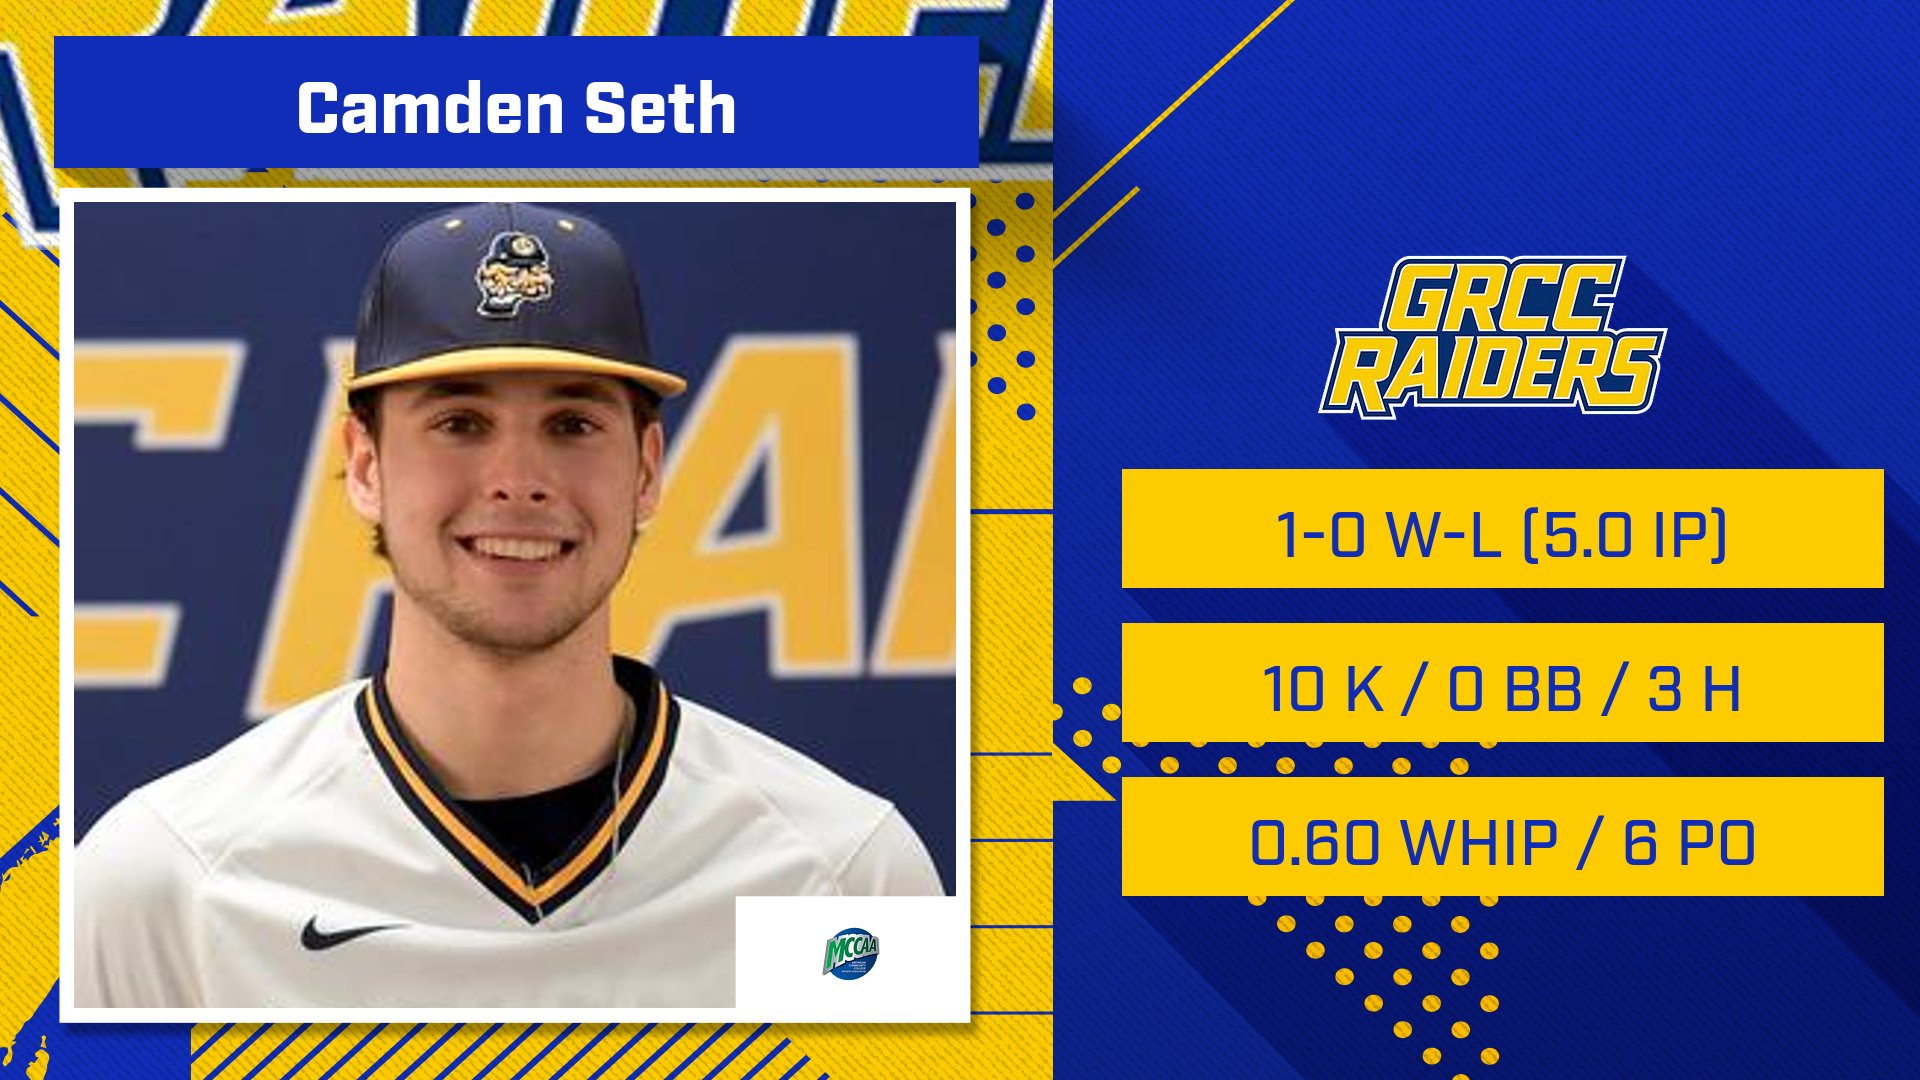 GRCC's Seth Earns First Career MCCAA Northern Conference Baseball Pitcher of the Week2 Honor